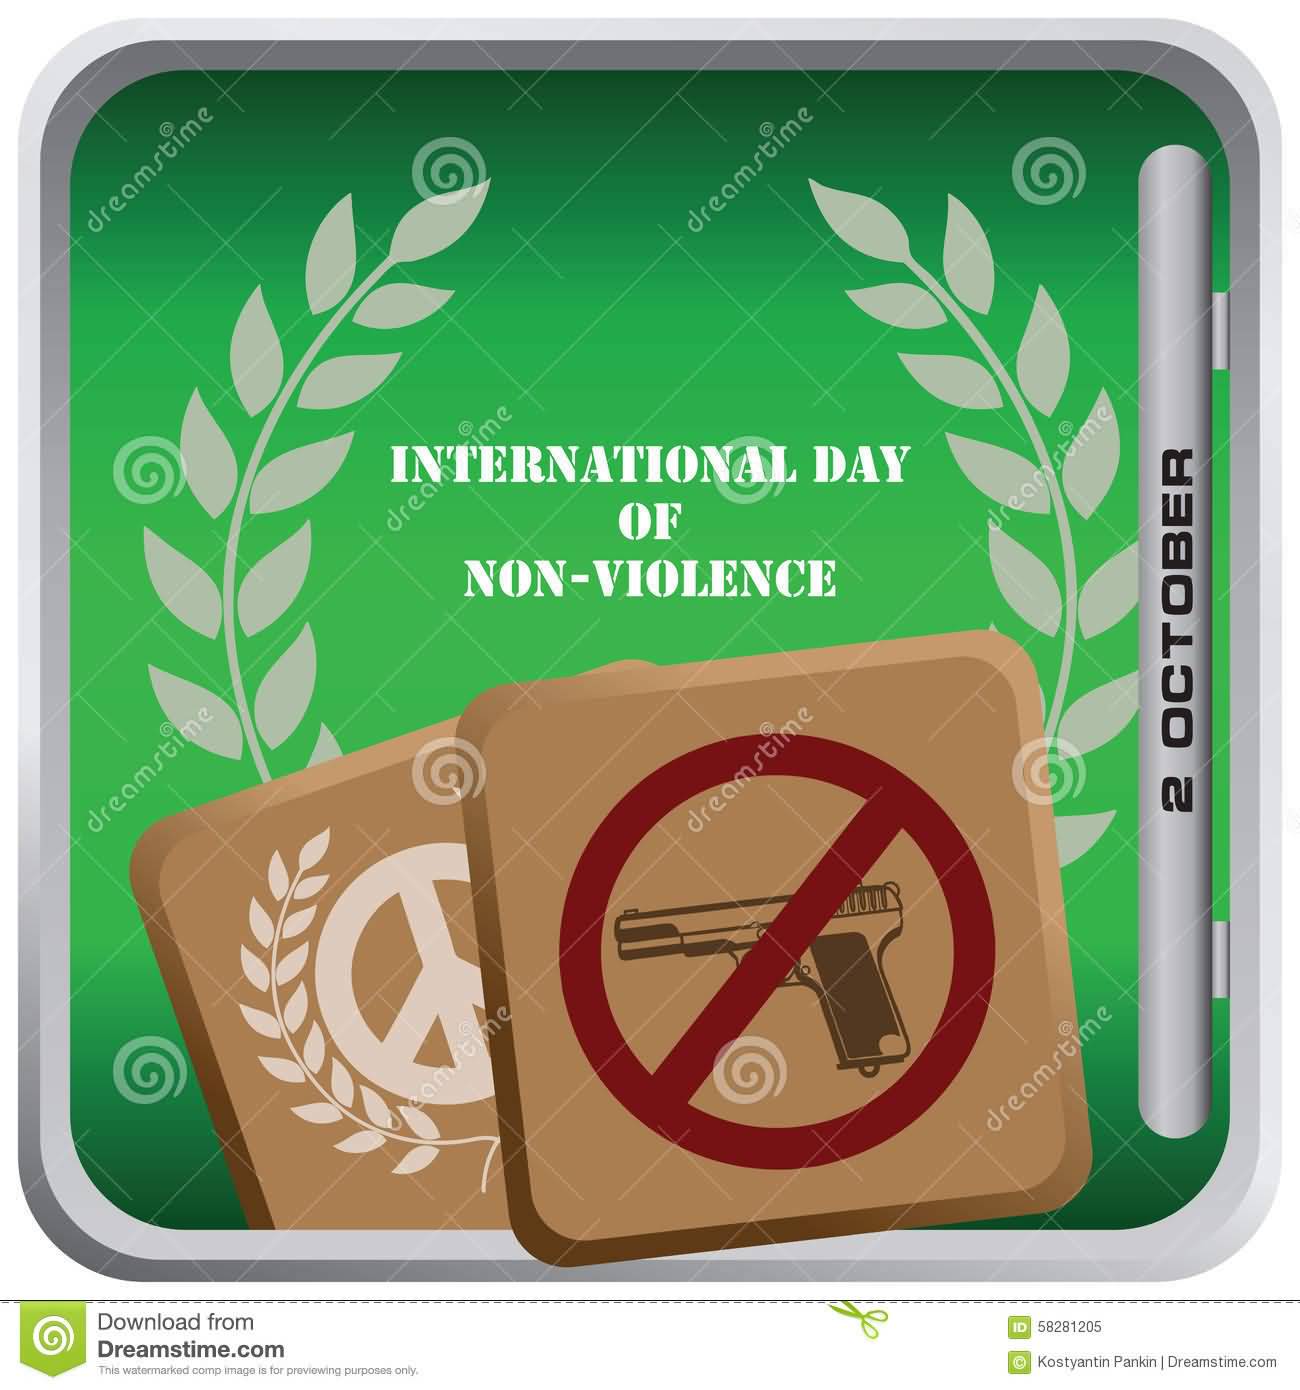 International Day of Non-Violence Card